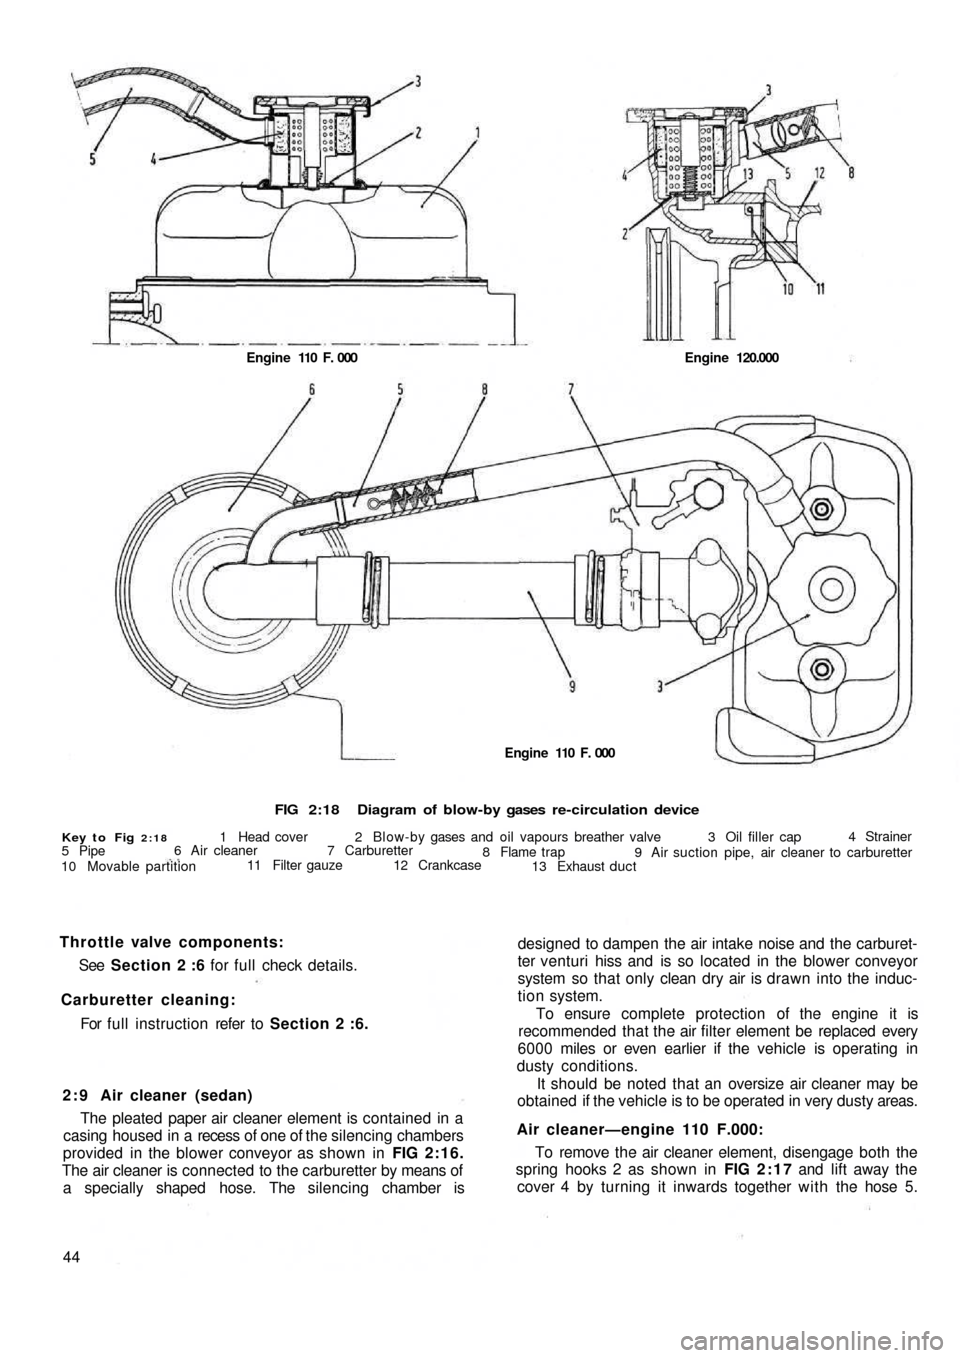 FIAT 500 1971 1.G Workshop Manual FIG 2:18Diagram of blow-by gases  re-circulation device
Key to Fig 2:181 Head cover 2 Blow-by gases and  oil vapours breather valve 3 Oil filler cap4 Strainer
9 Air suction pipe, air cleaner to carbur